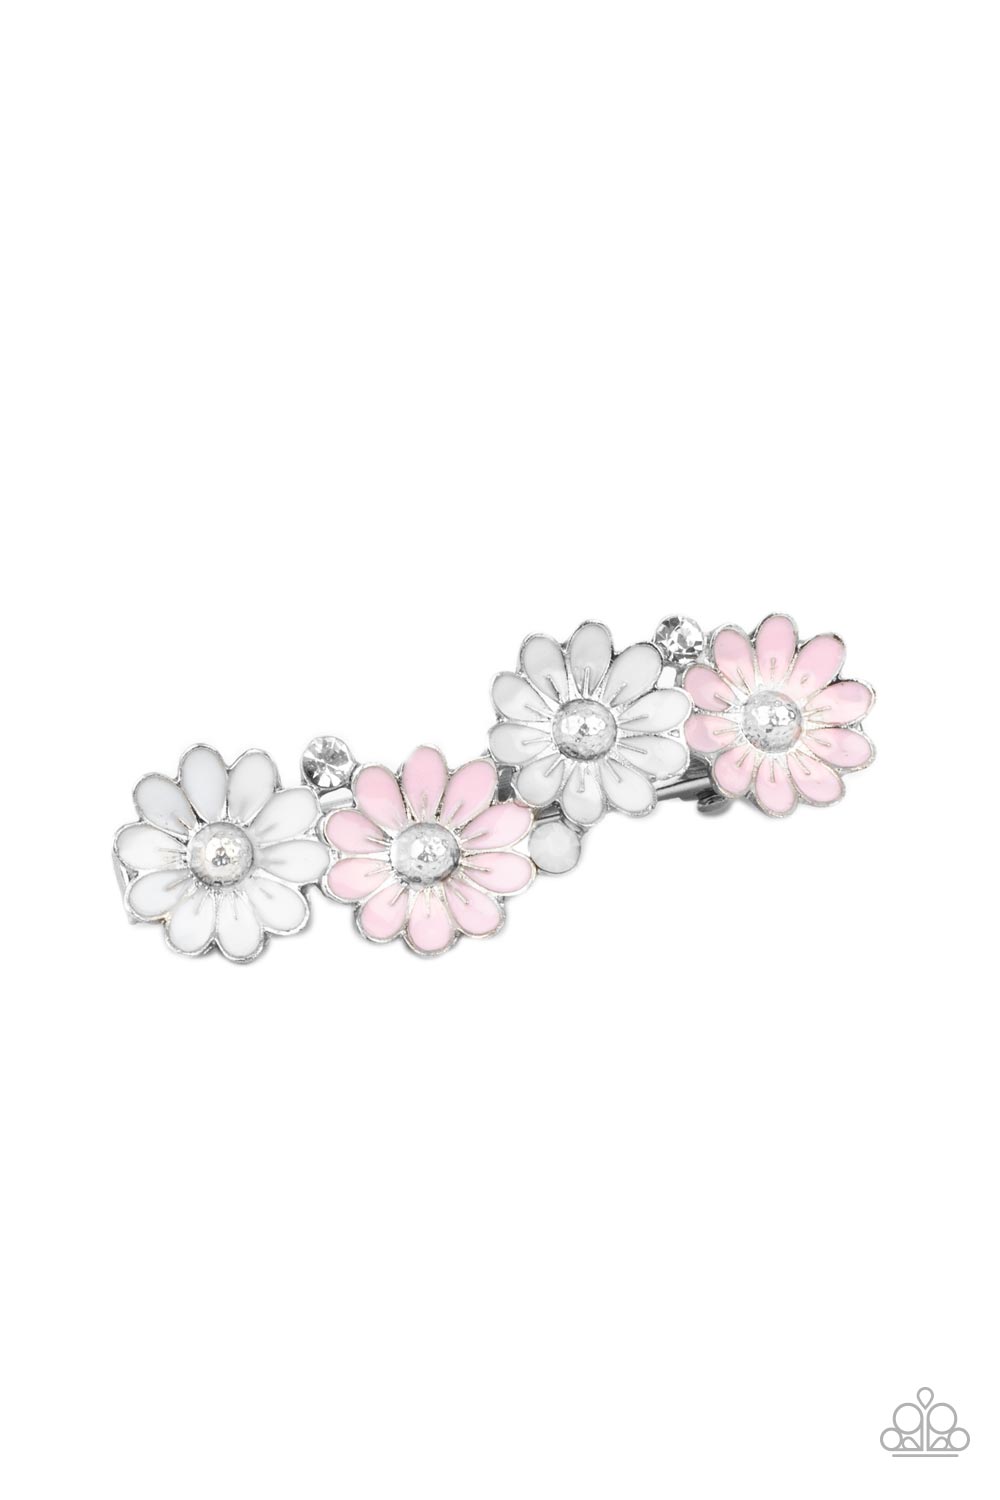 Paparazzi Accessories Ok, BLOOMER - Pink Featuring hammered silver beaded centers, pairs of white and pink flowers join opal and white rhinestones across the front of a silver frame for a seasonal look. Features a standard hair clip on the back. Sold as o